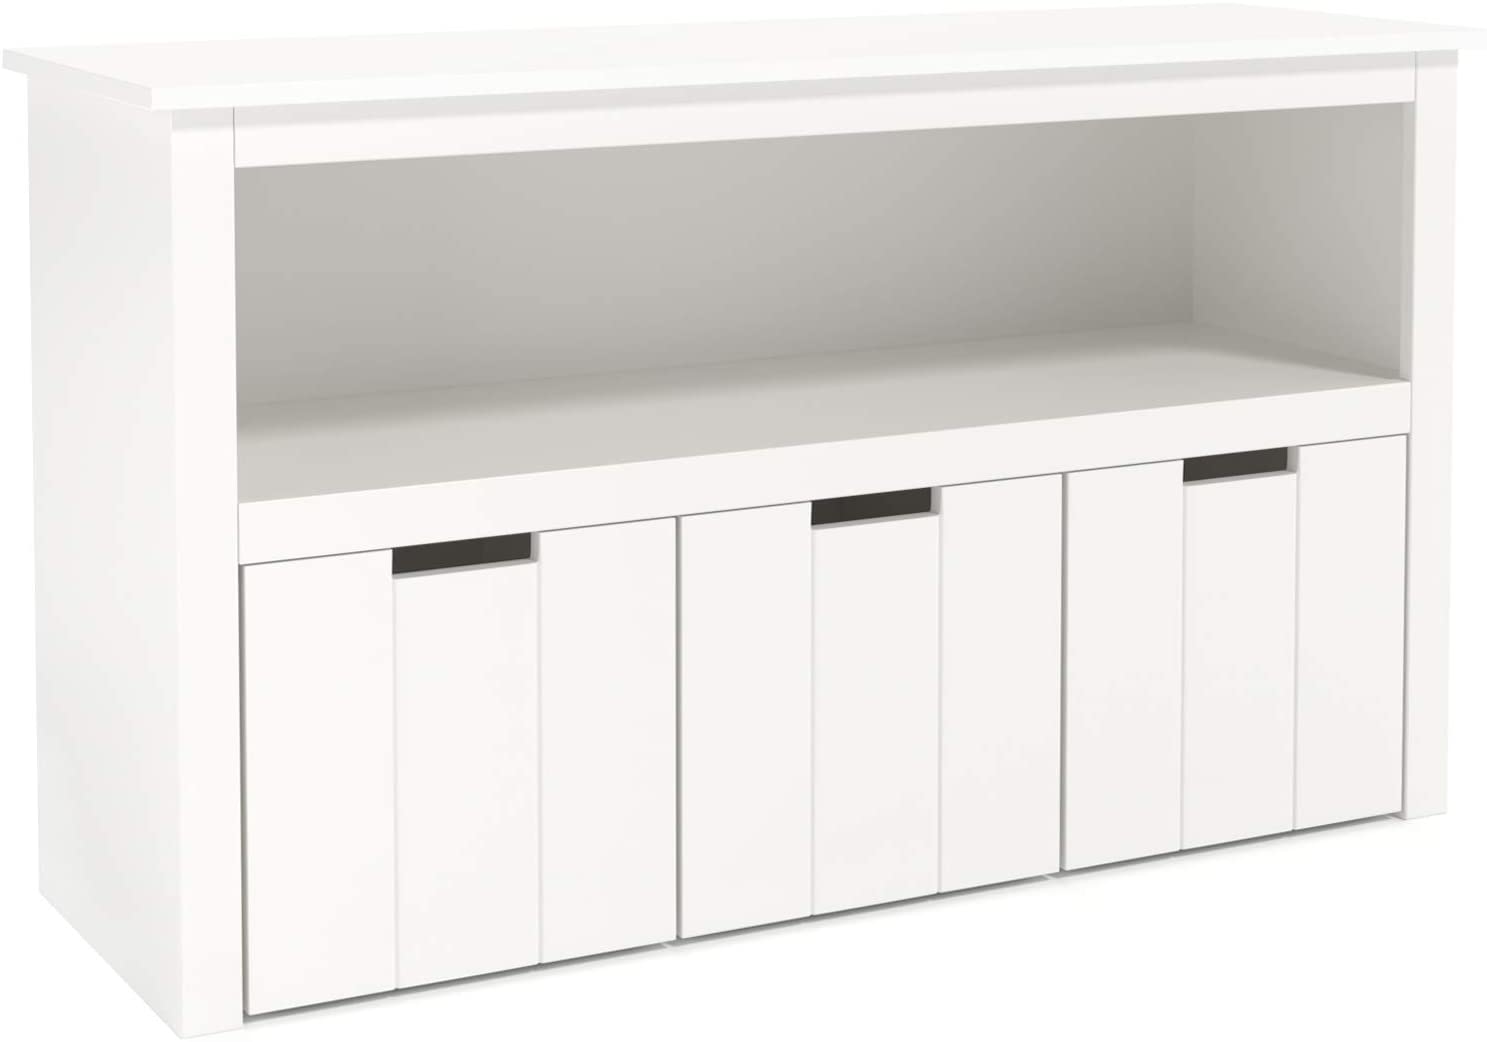 Homfa Kids Storage for Toy, Cube Storage Shelf with 3 Drawers for Kid's Gift, Living Room, White - image 1 of 9